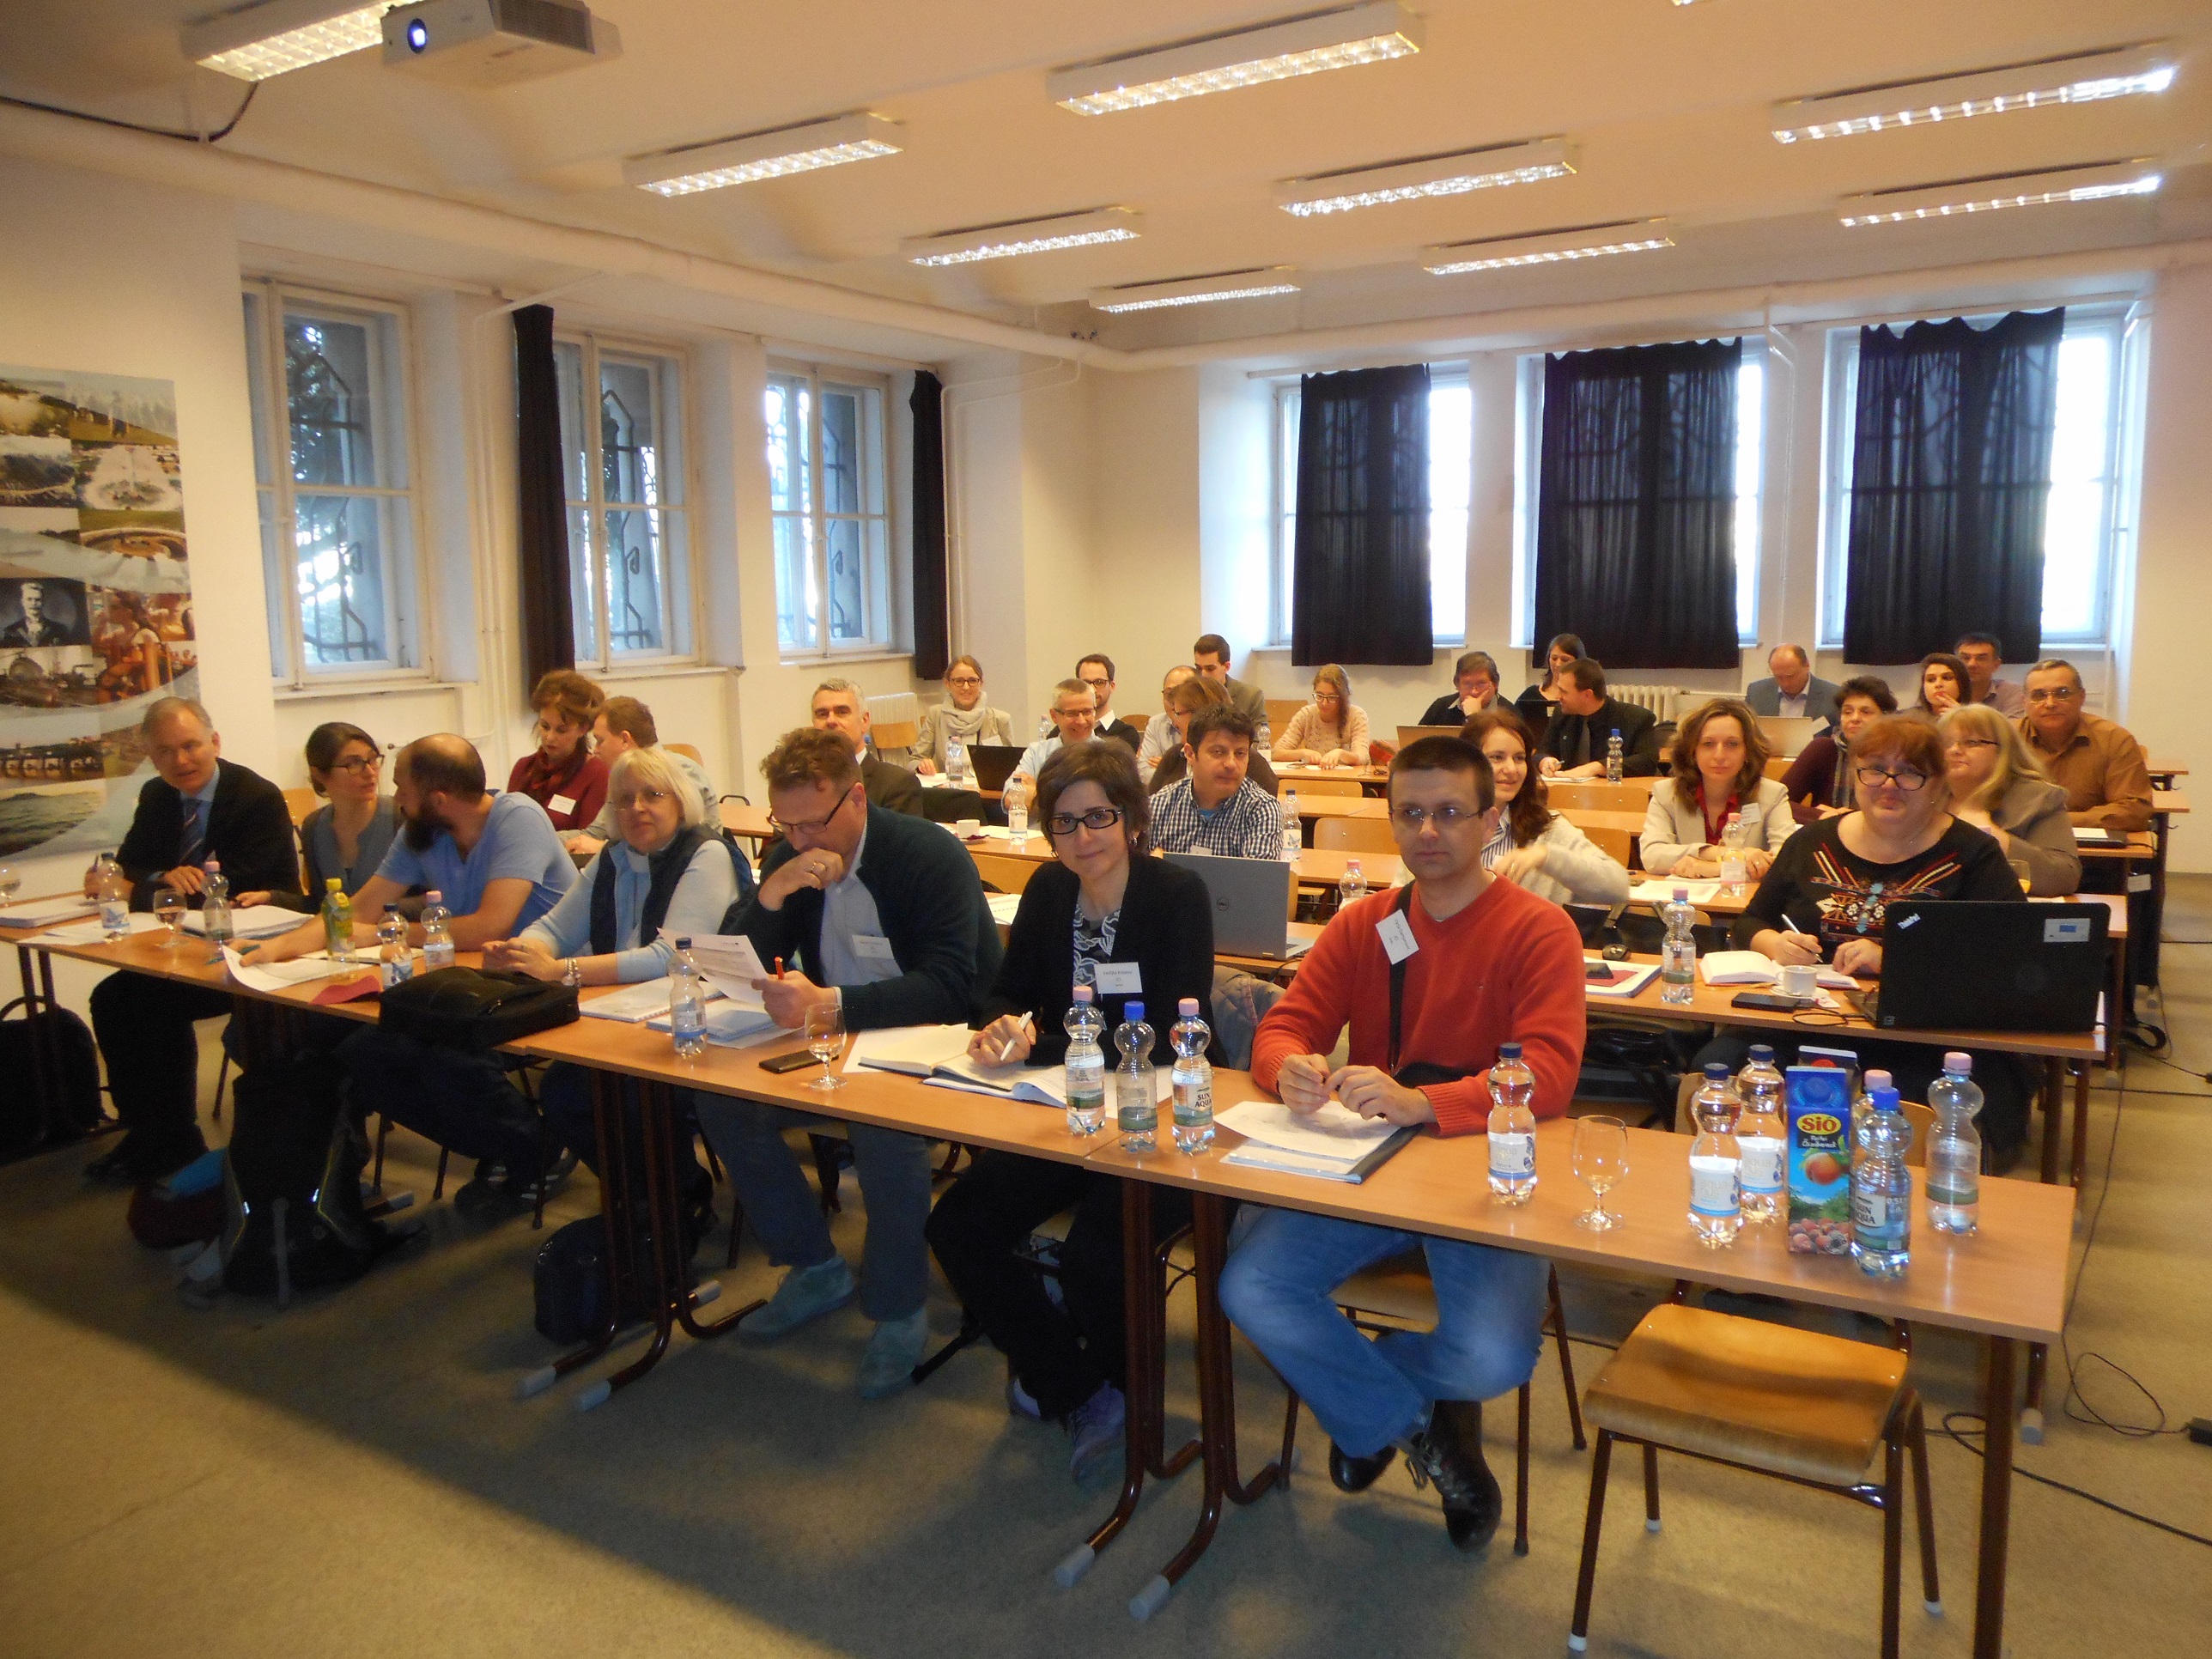 Budapest University room with about 30 persons seated at desks